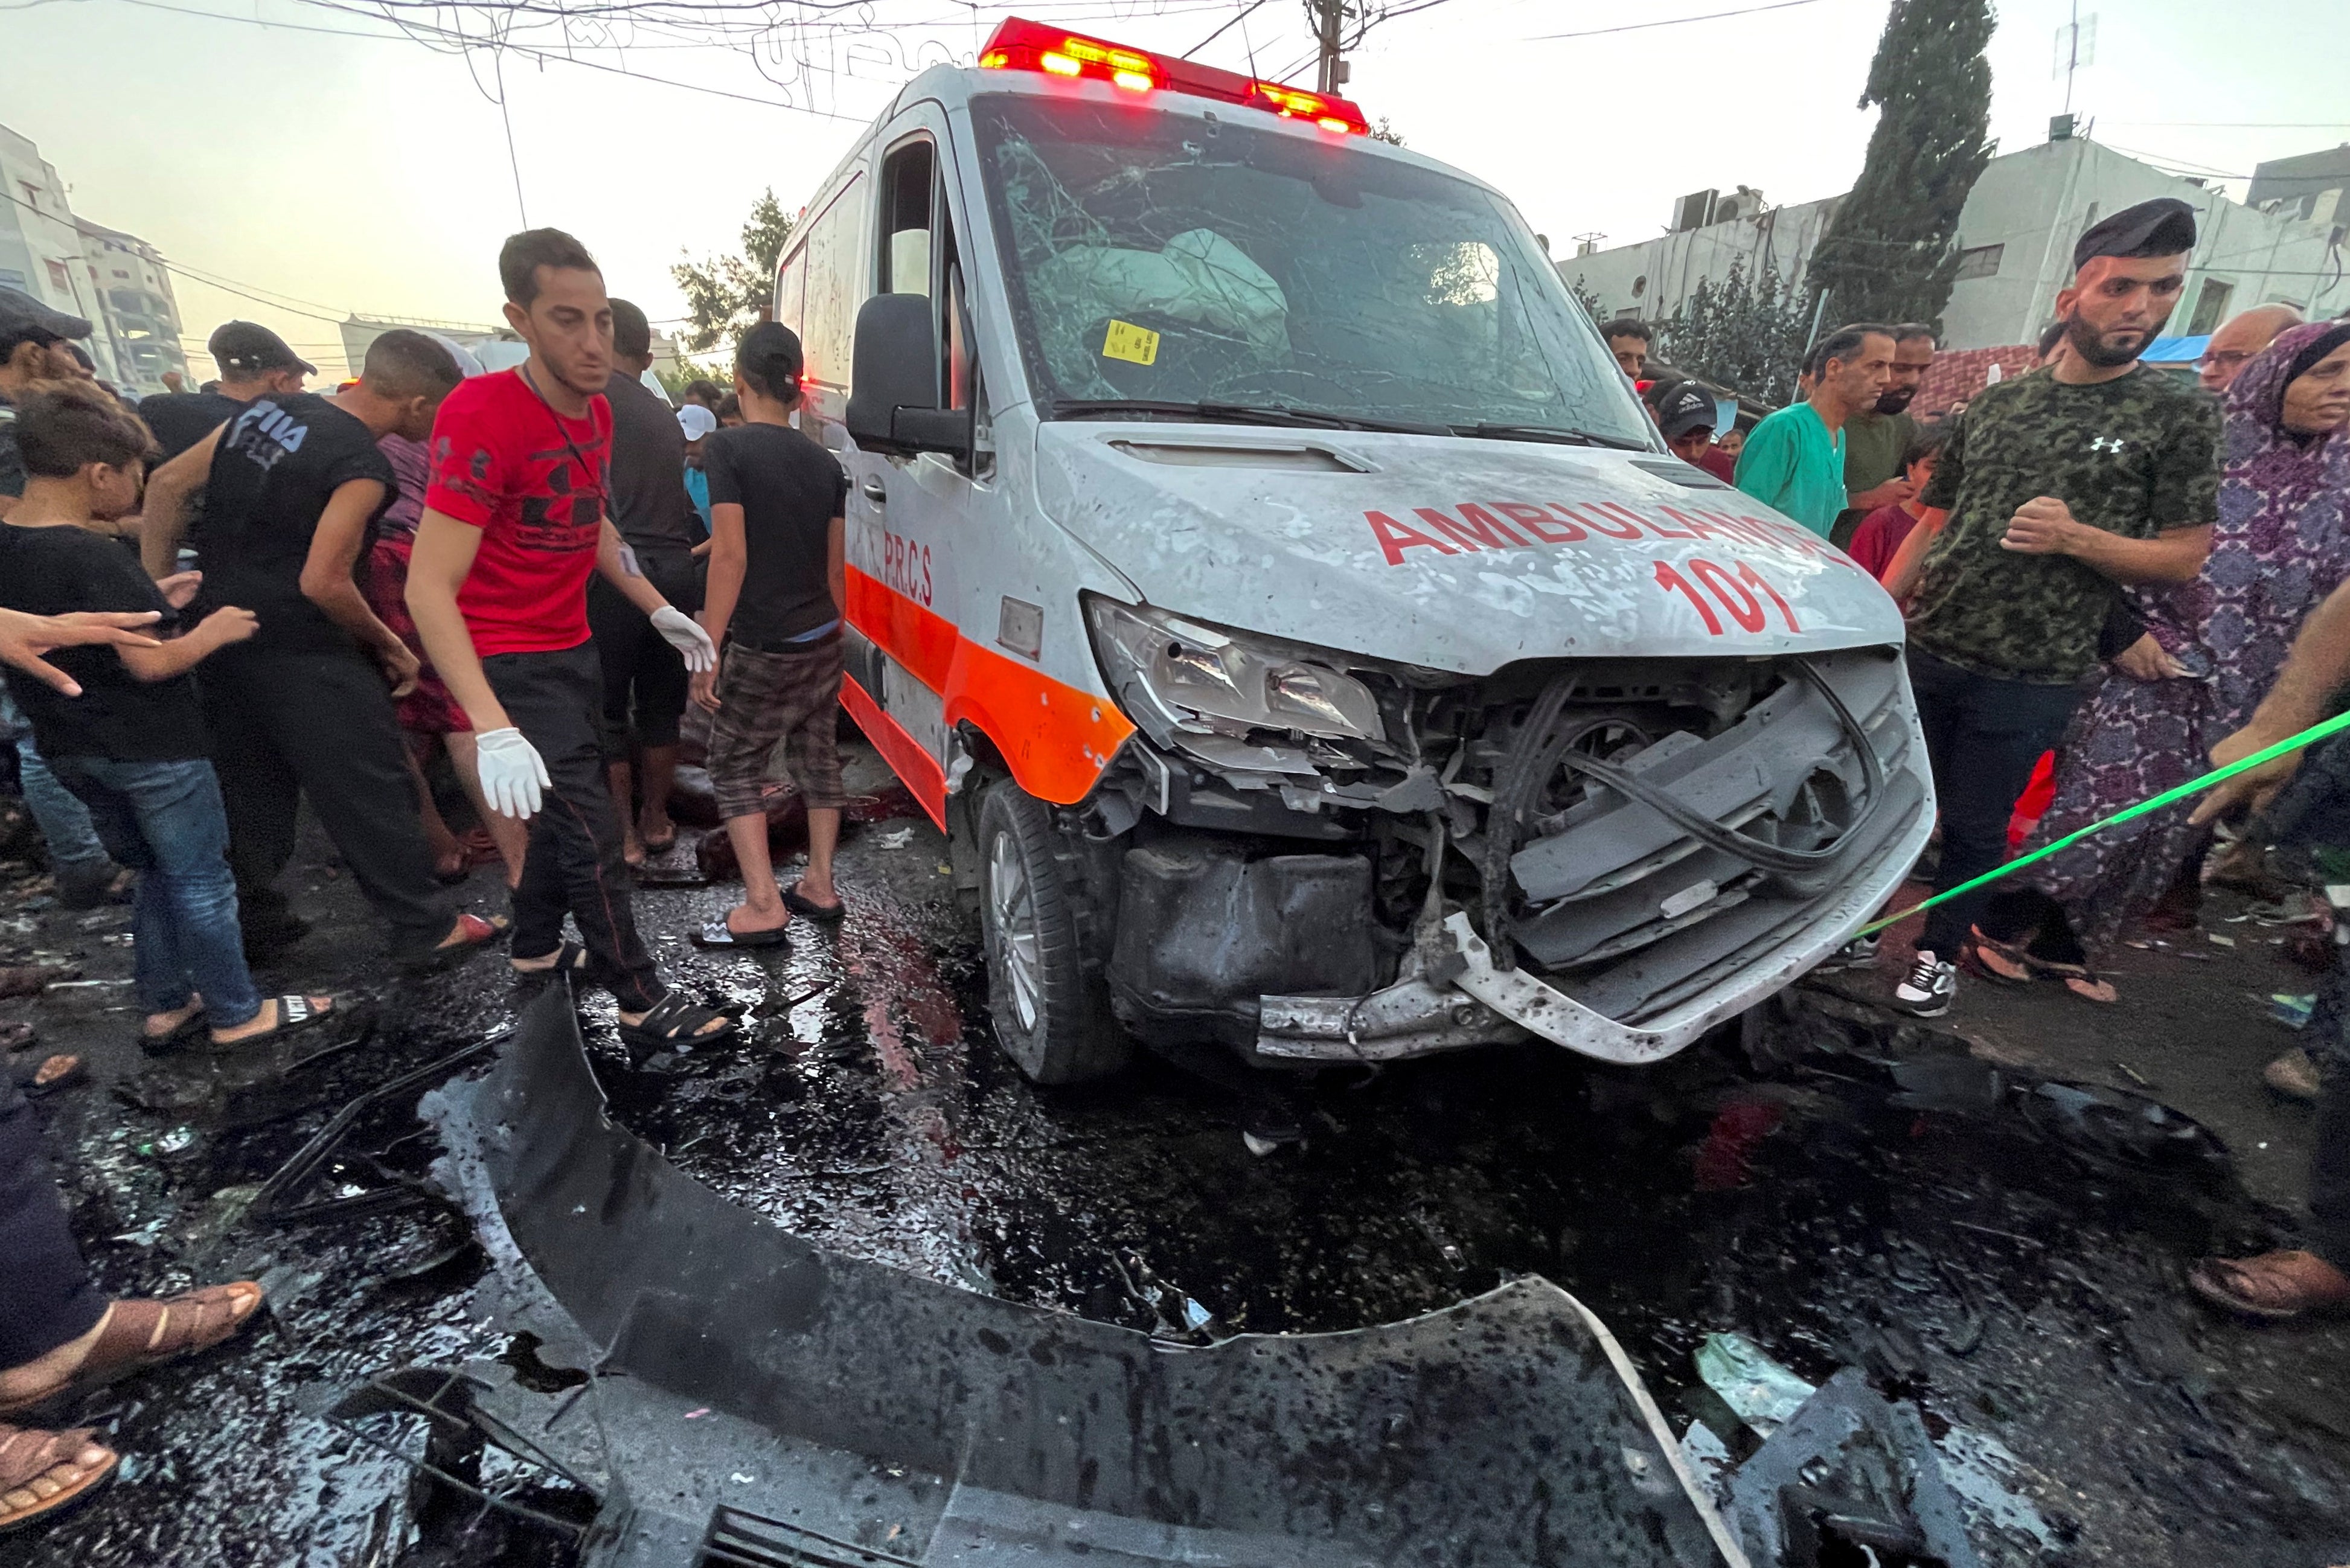 Palestinians help the victims of an Israeli airstrike that hit an ambulance on Friday